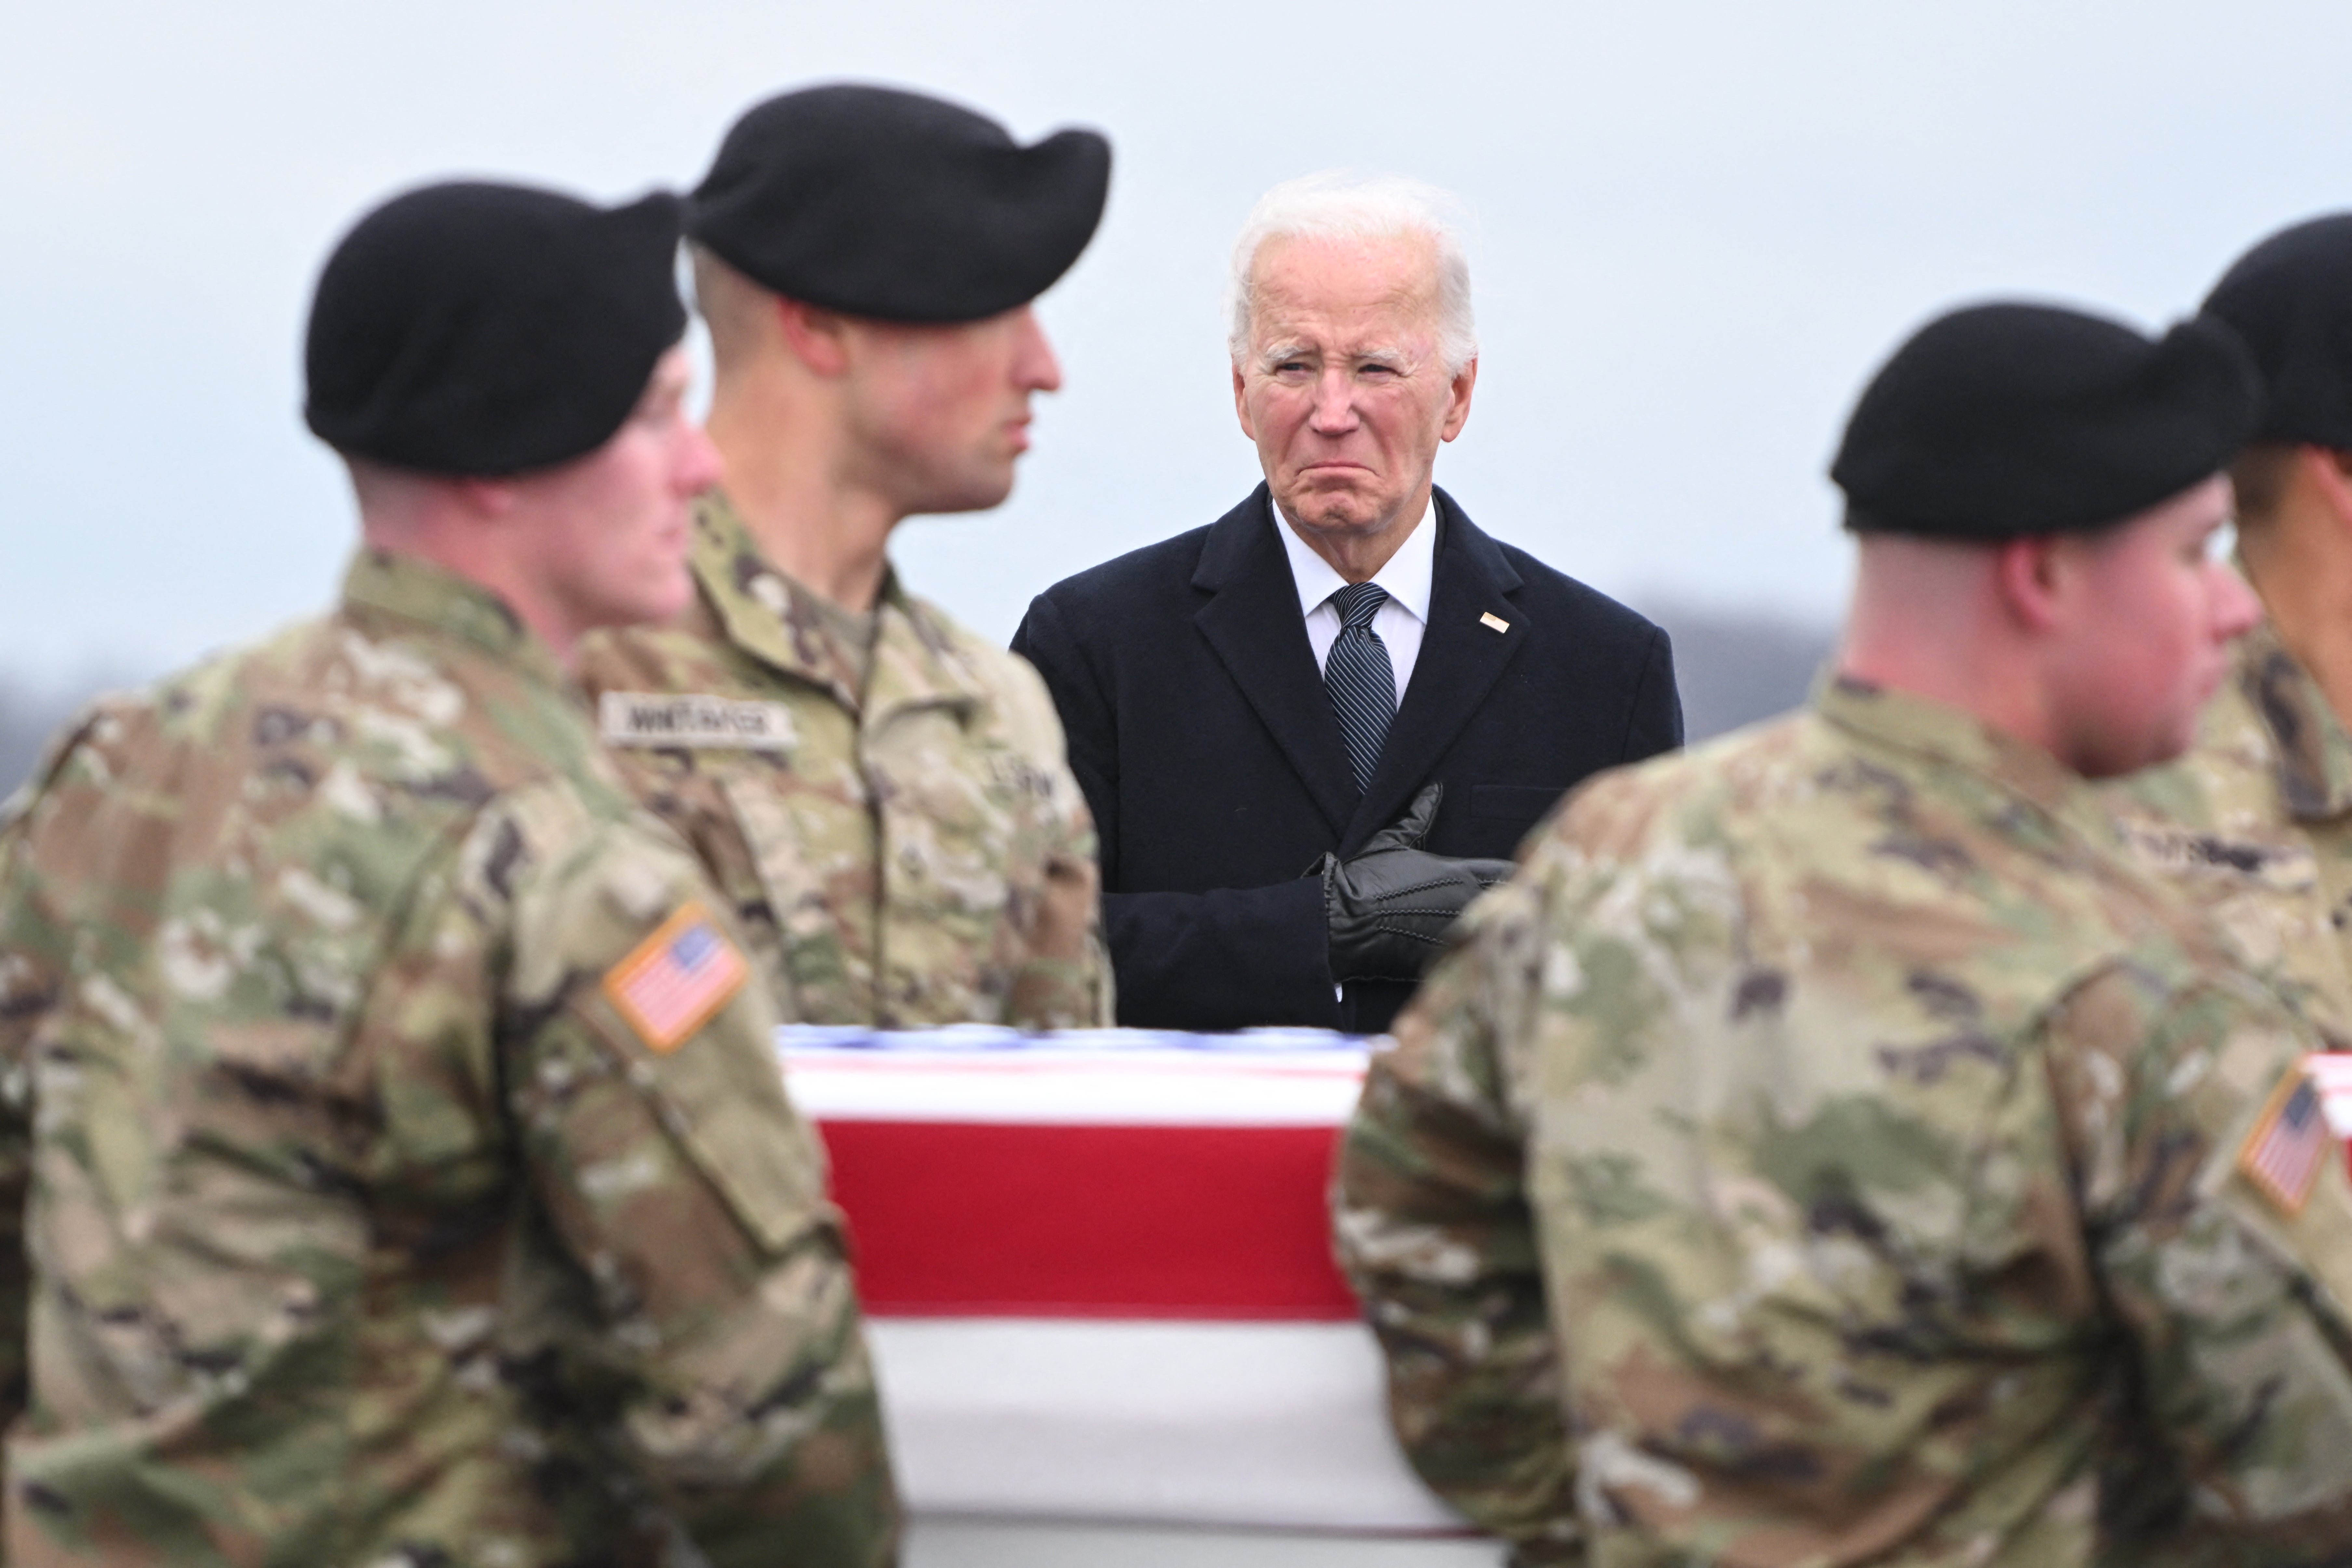 US President Joe Biden attends the dignified transfer of the remains of three US service members killed in Jordan